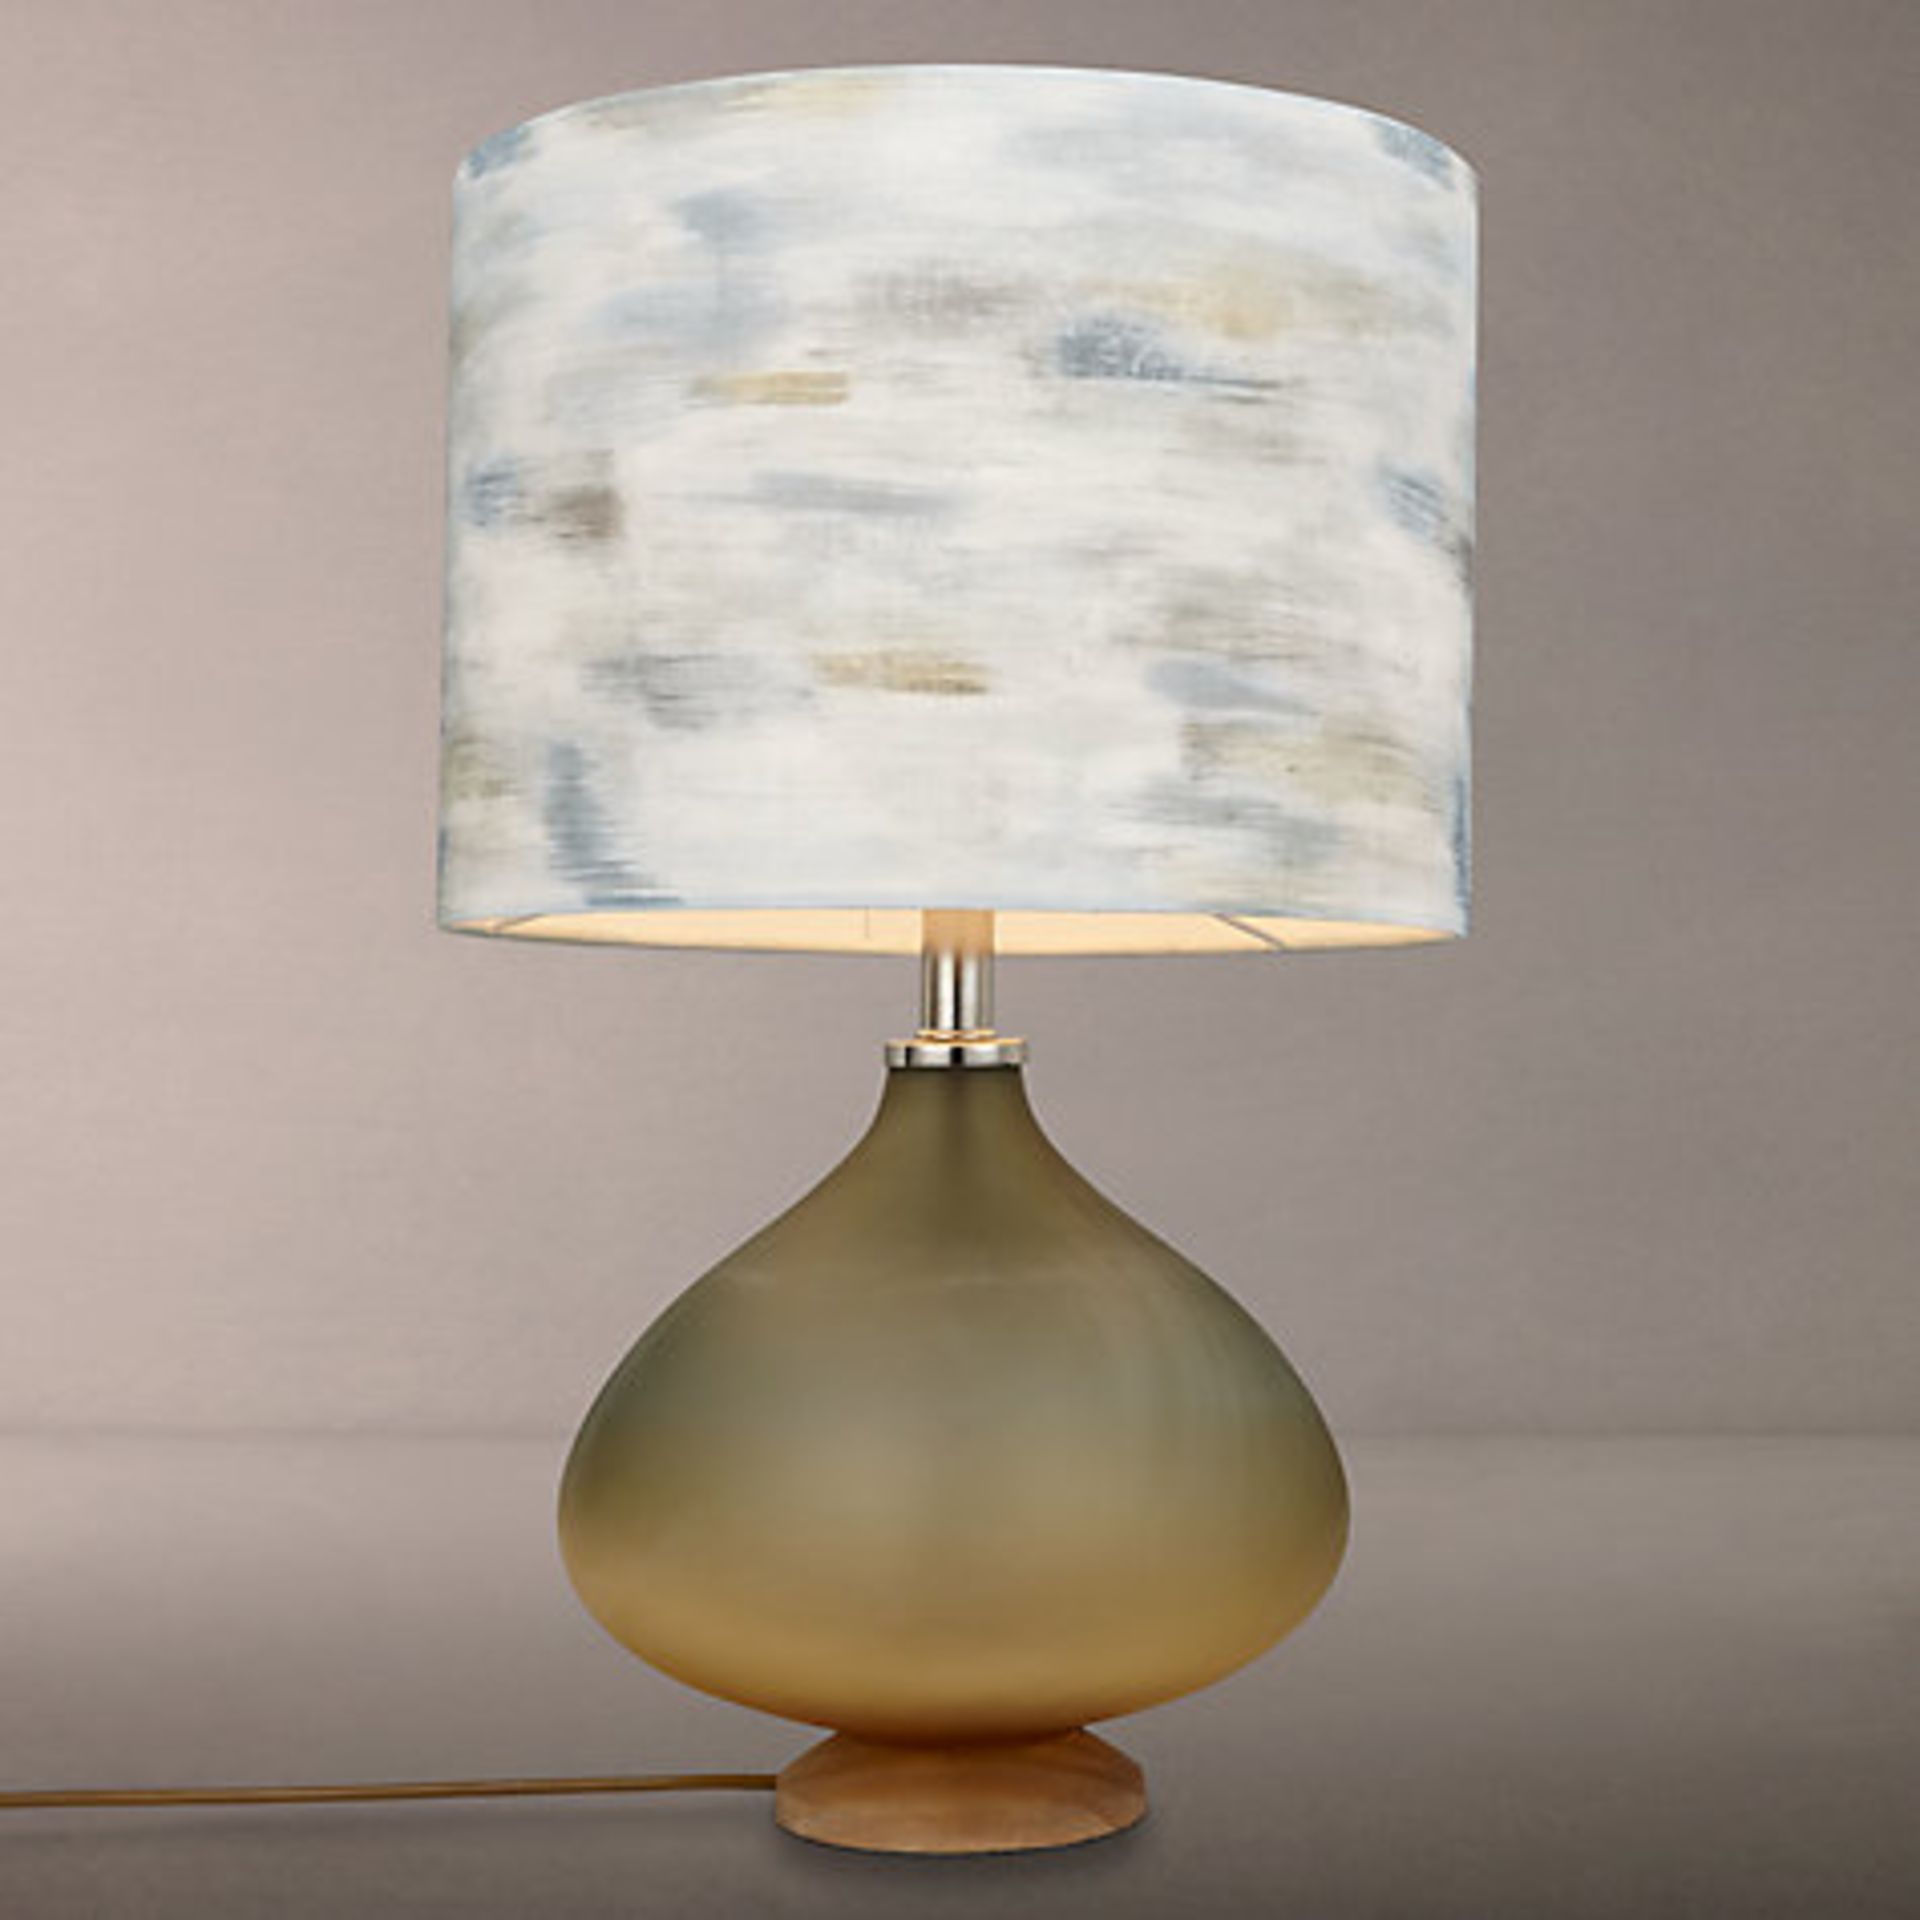 1 x VOYAGE BEZDEL TABLE LAMP IN CITRINE RRP £160 18.07.17 *PLEASE NOTE THAT THE BID PRICE IS